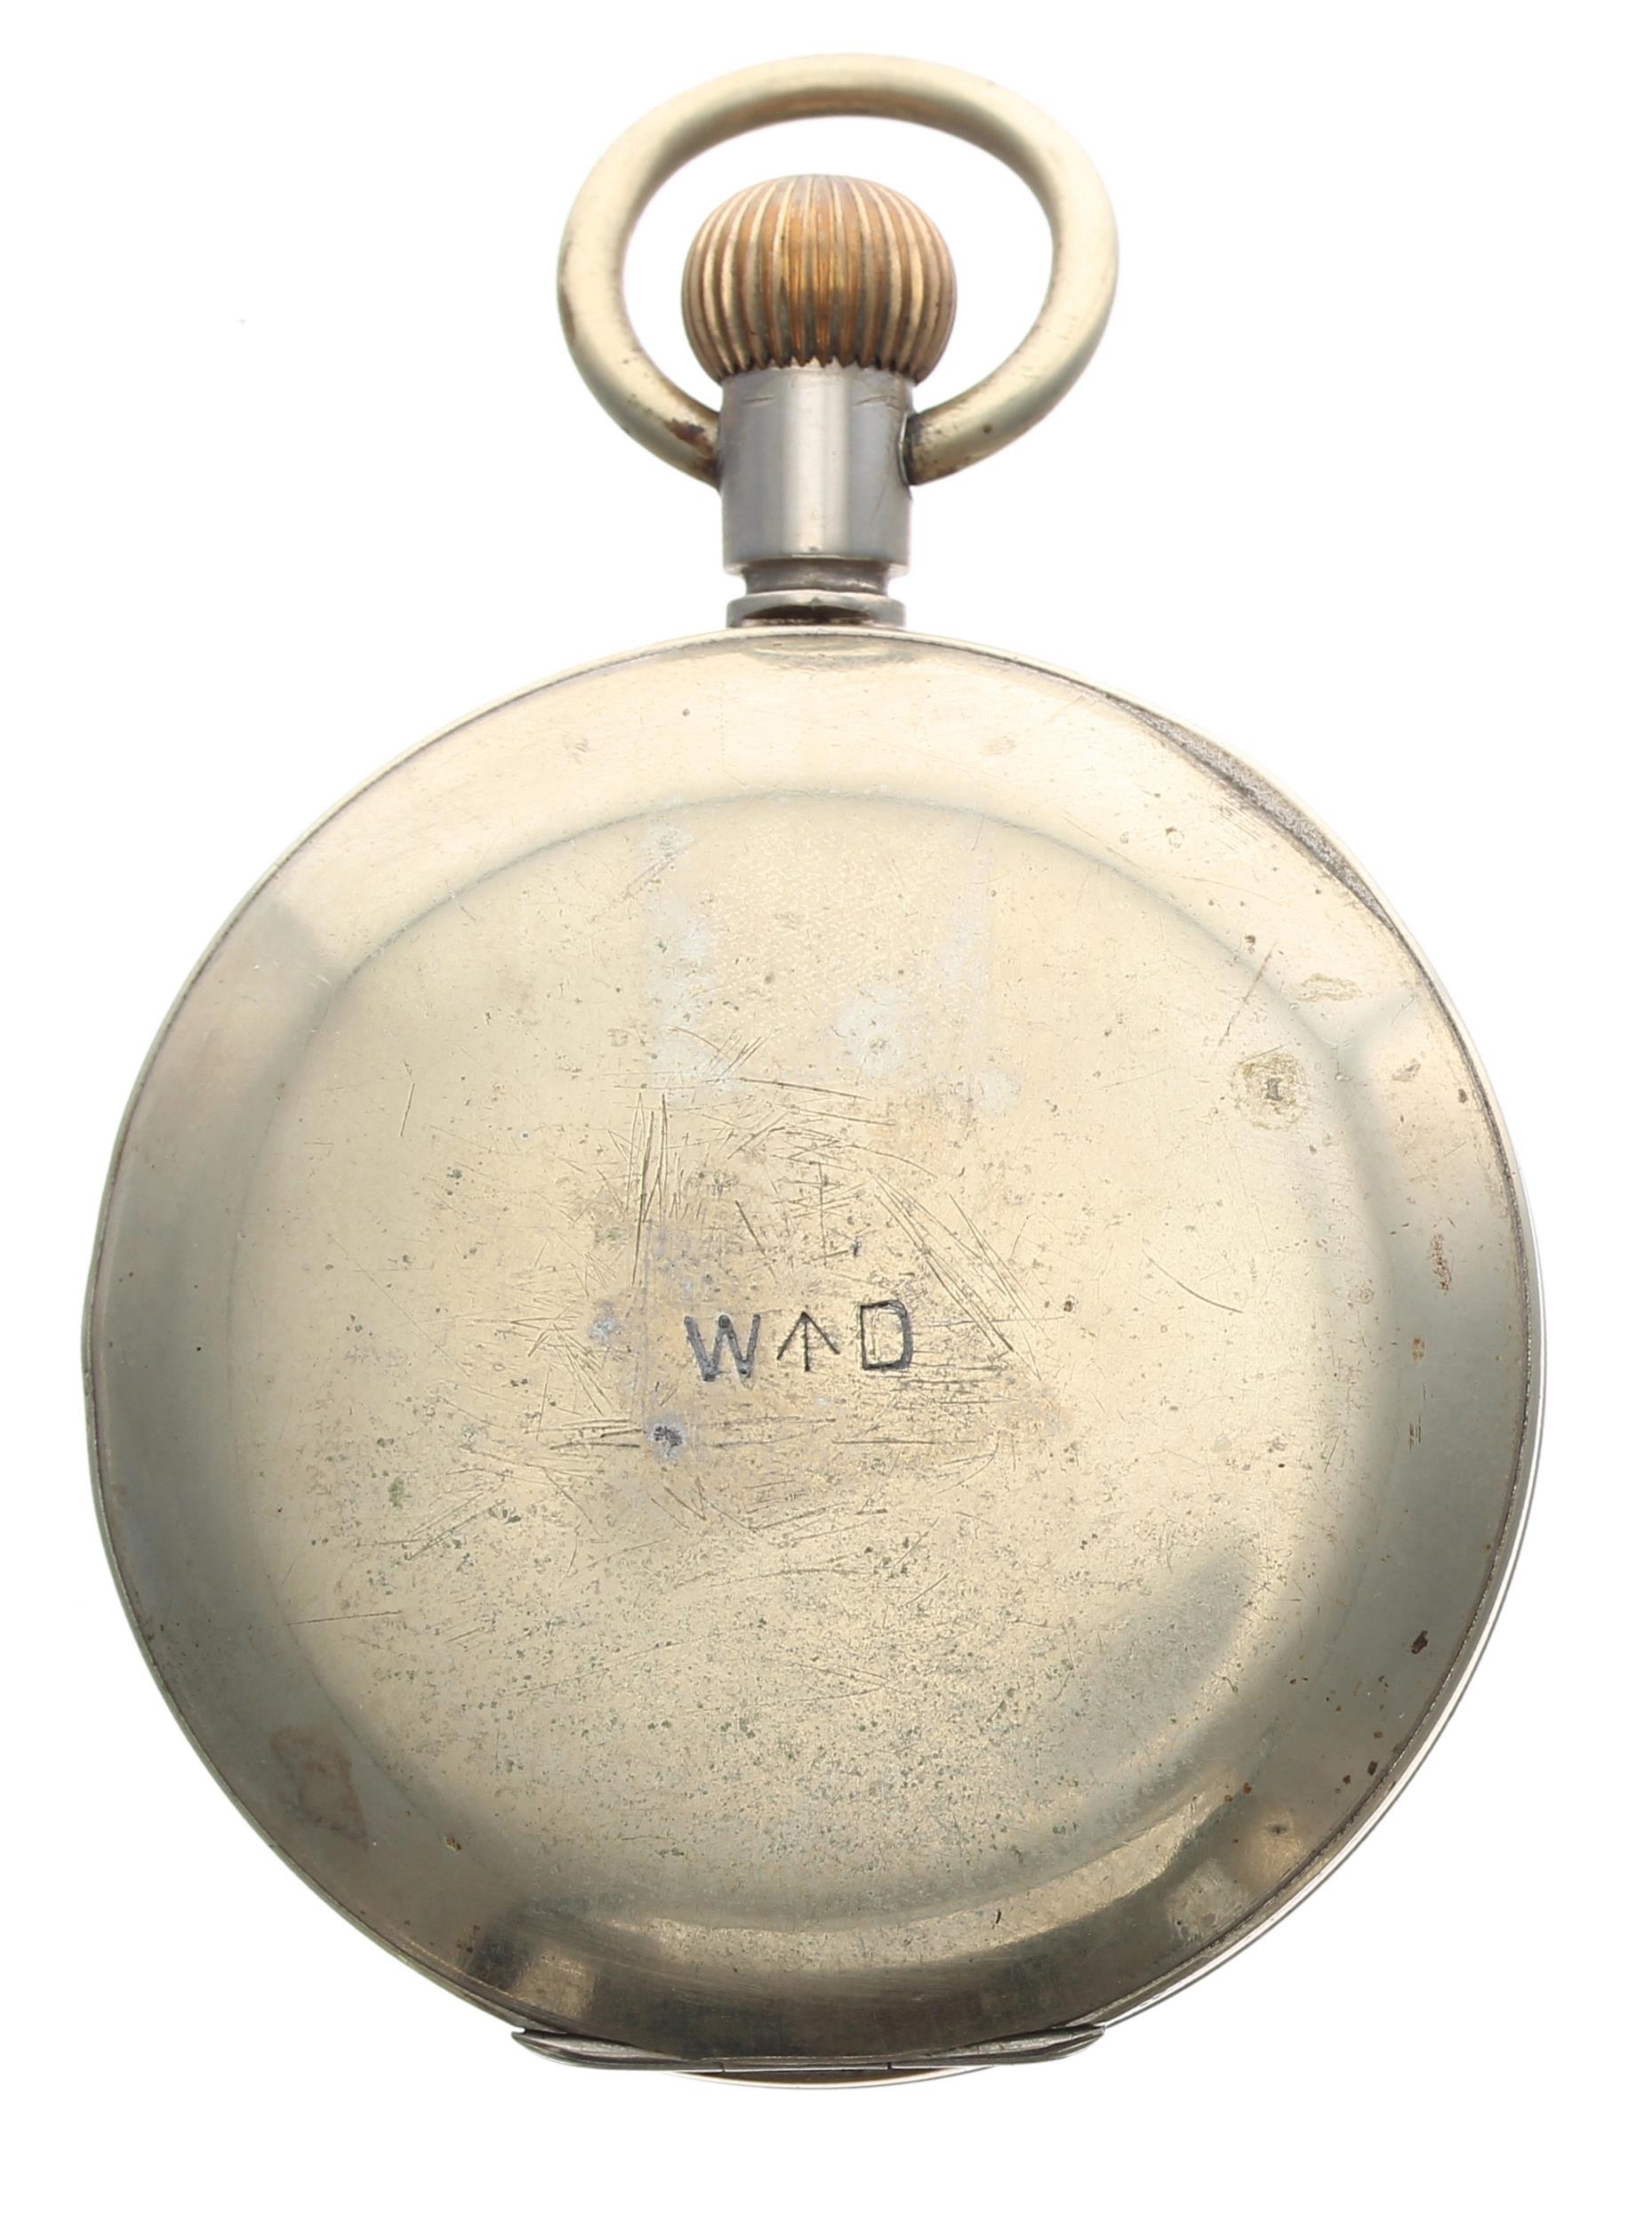 British Military WWI period War Department issue 8 days nickel cased lever pocket watch, frosted - Image 2 of 3